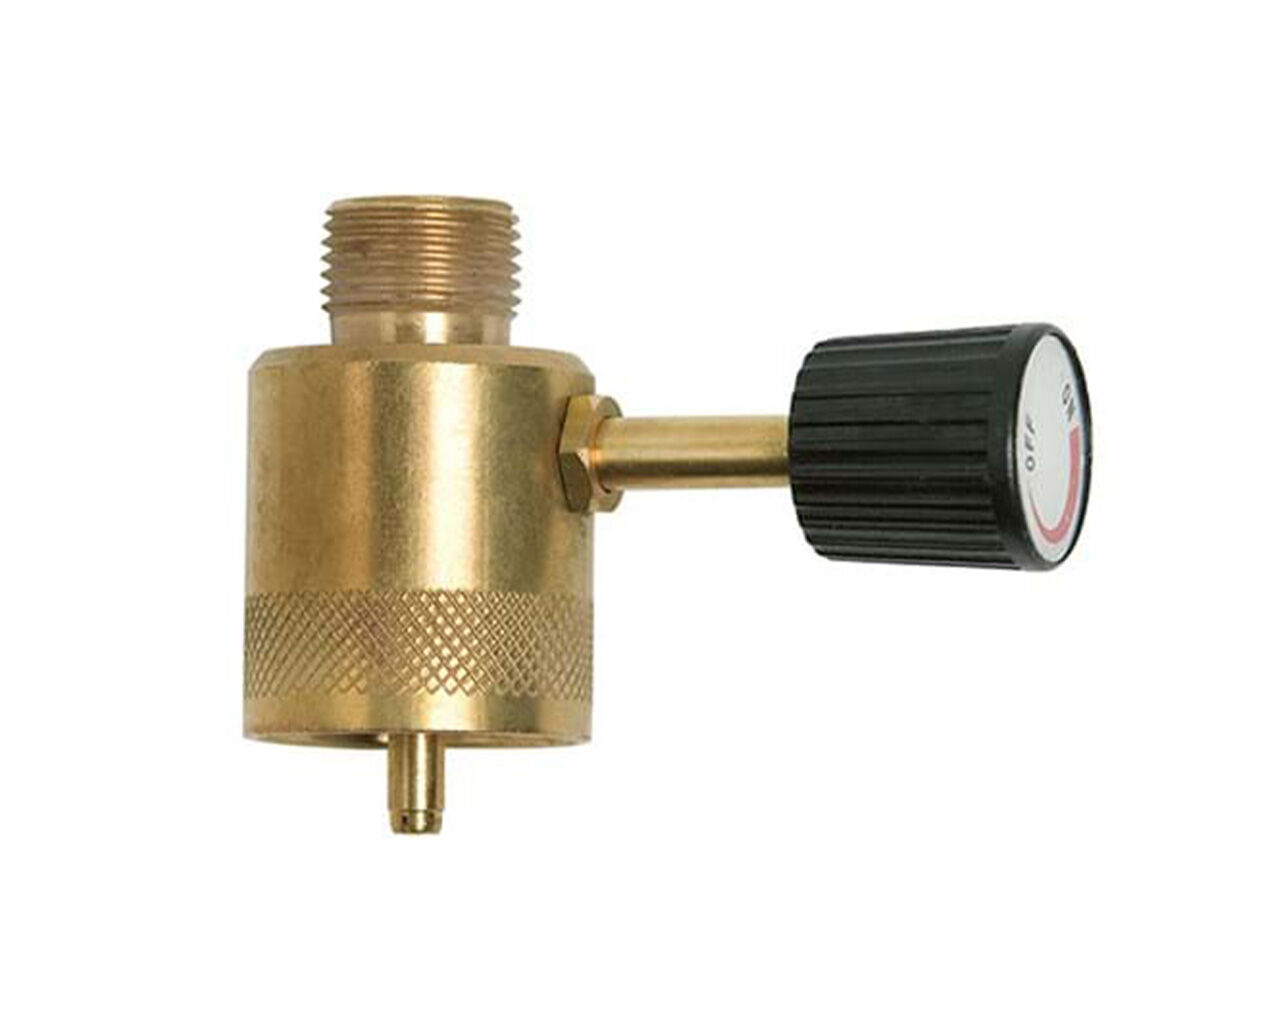 Gasmate Adaptor - 1" UNEF outlet to 3/8" BSP-L